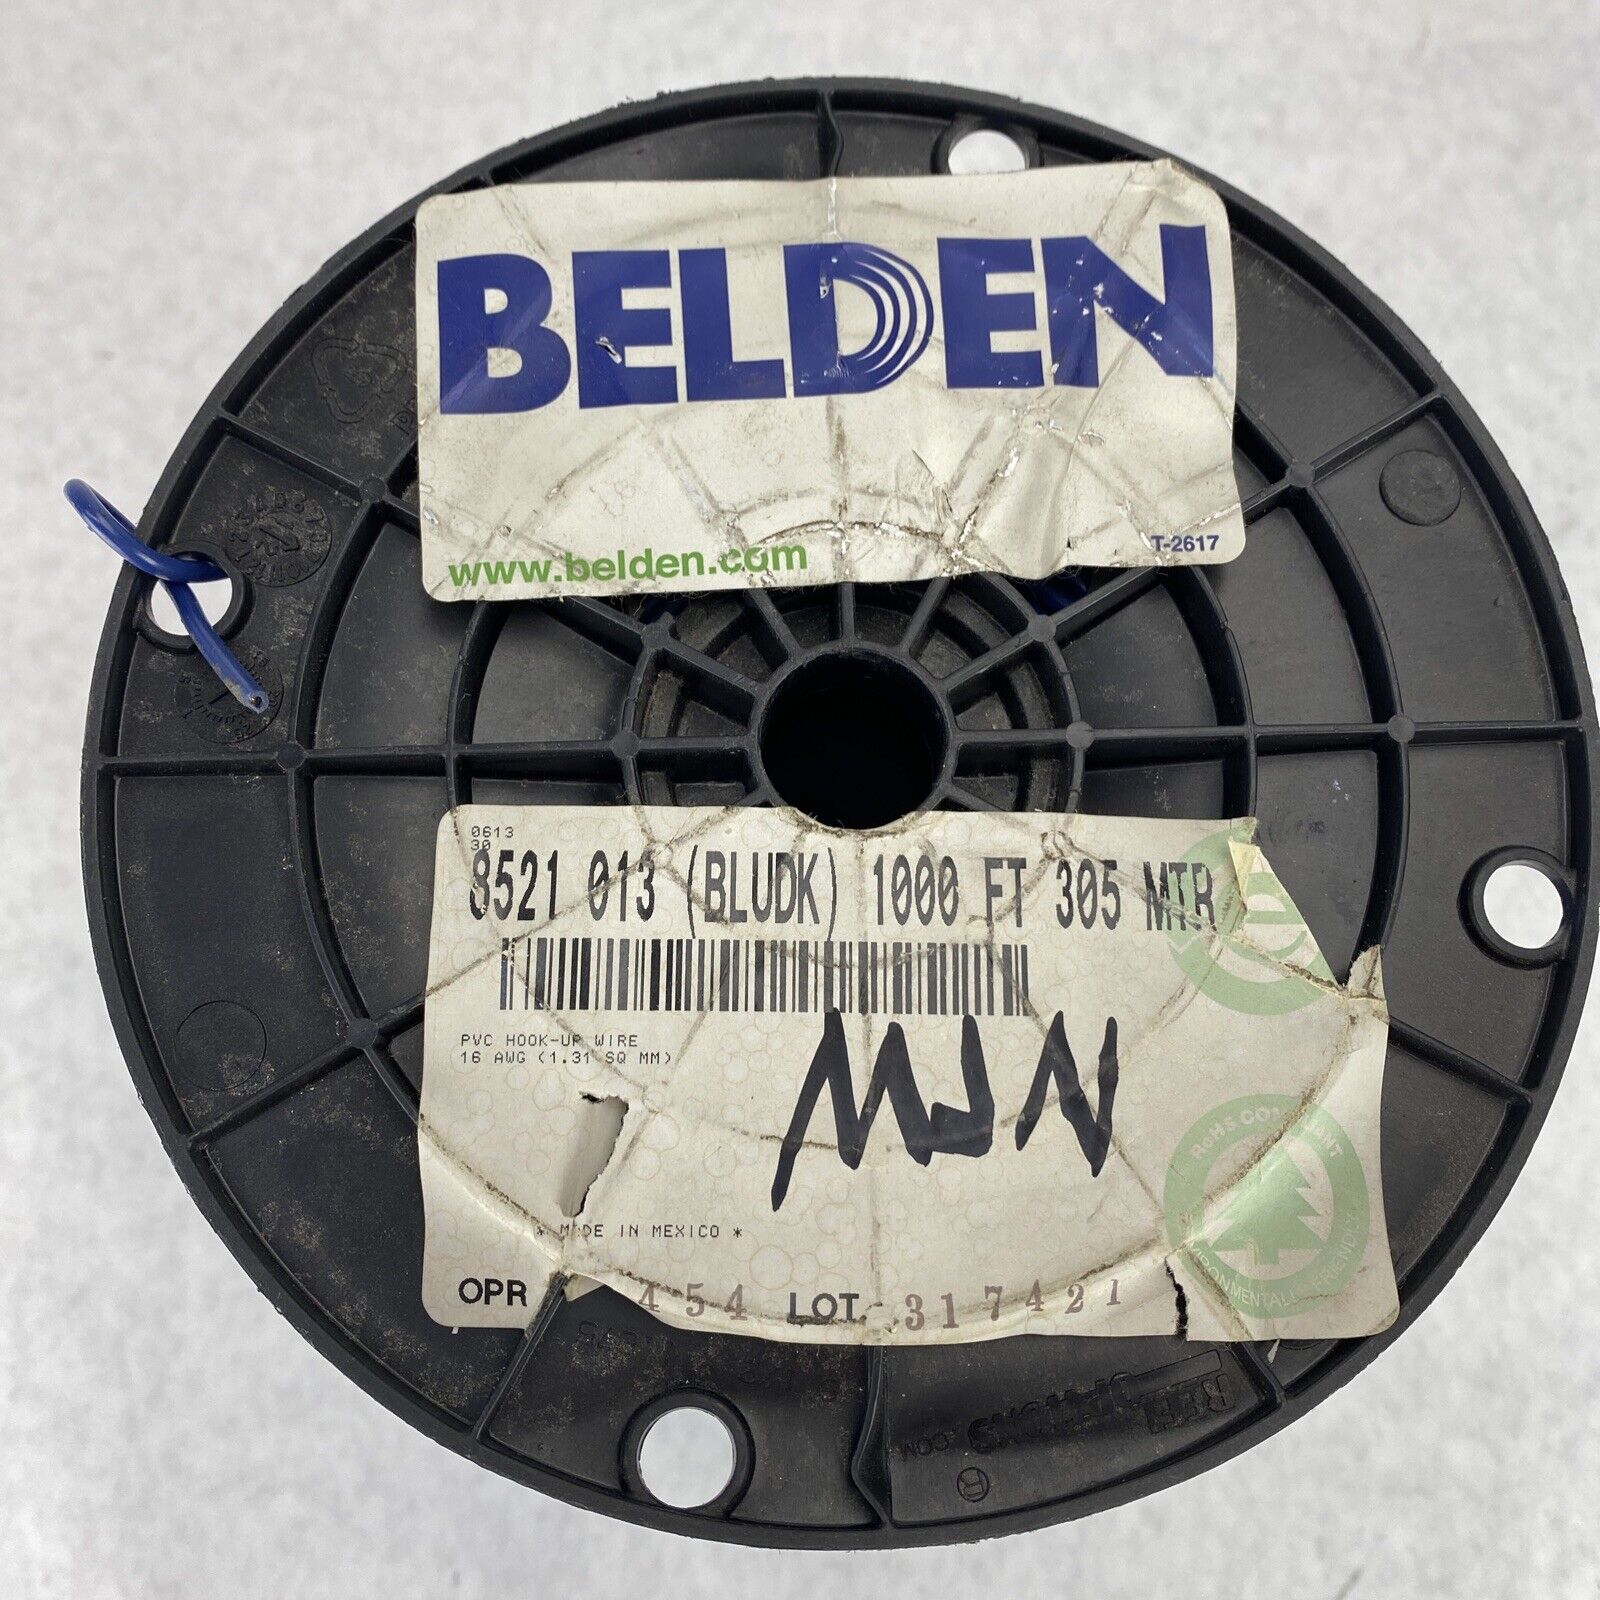 11.45 lbs Remaining Belden 8521 013 BLUDK 16awg Copper PVC Hook Up Wire